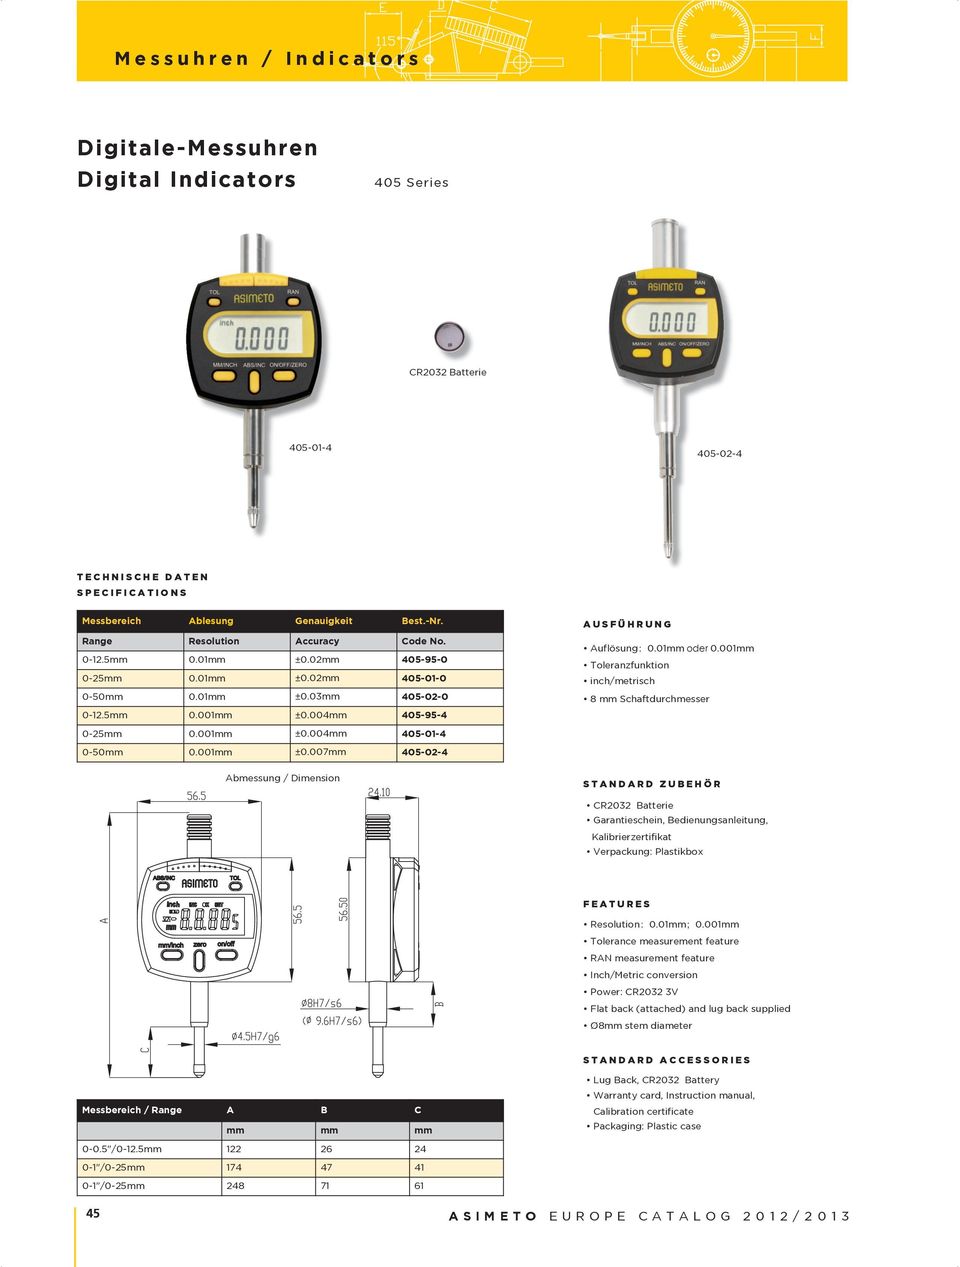 1mm.1mm Tolerance measurement feature RAN measurement feature Inch/Metric conversion Power: CR232 3V Flat back (attached) and lug back supplied Ø8mm stem diameter STANDARD ACCESSORIES Messbereich /